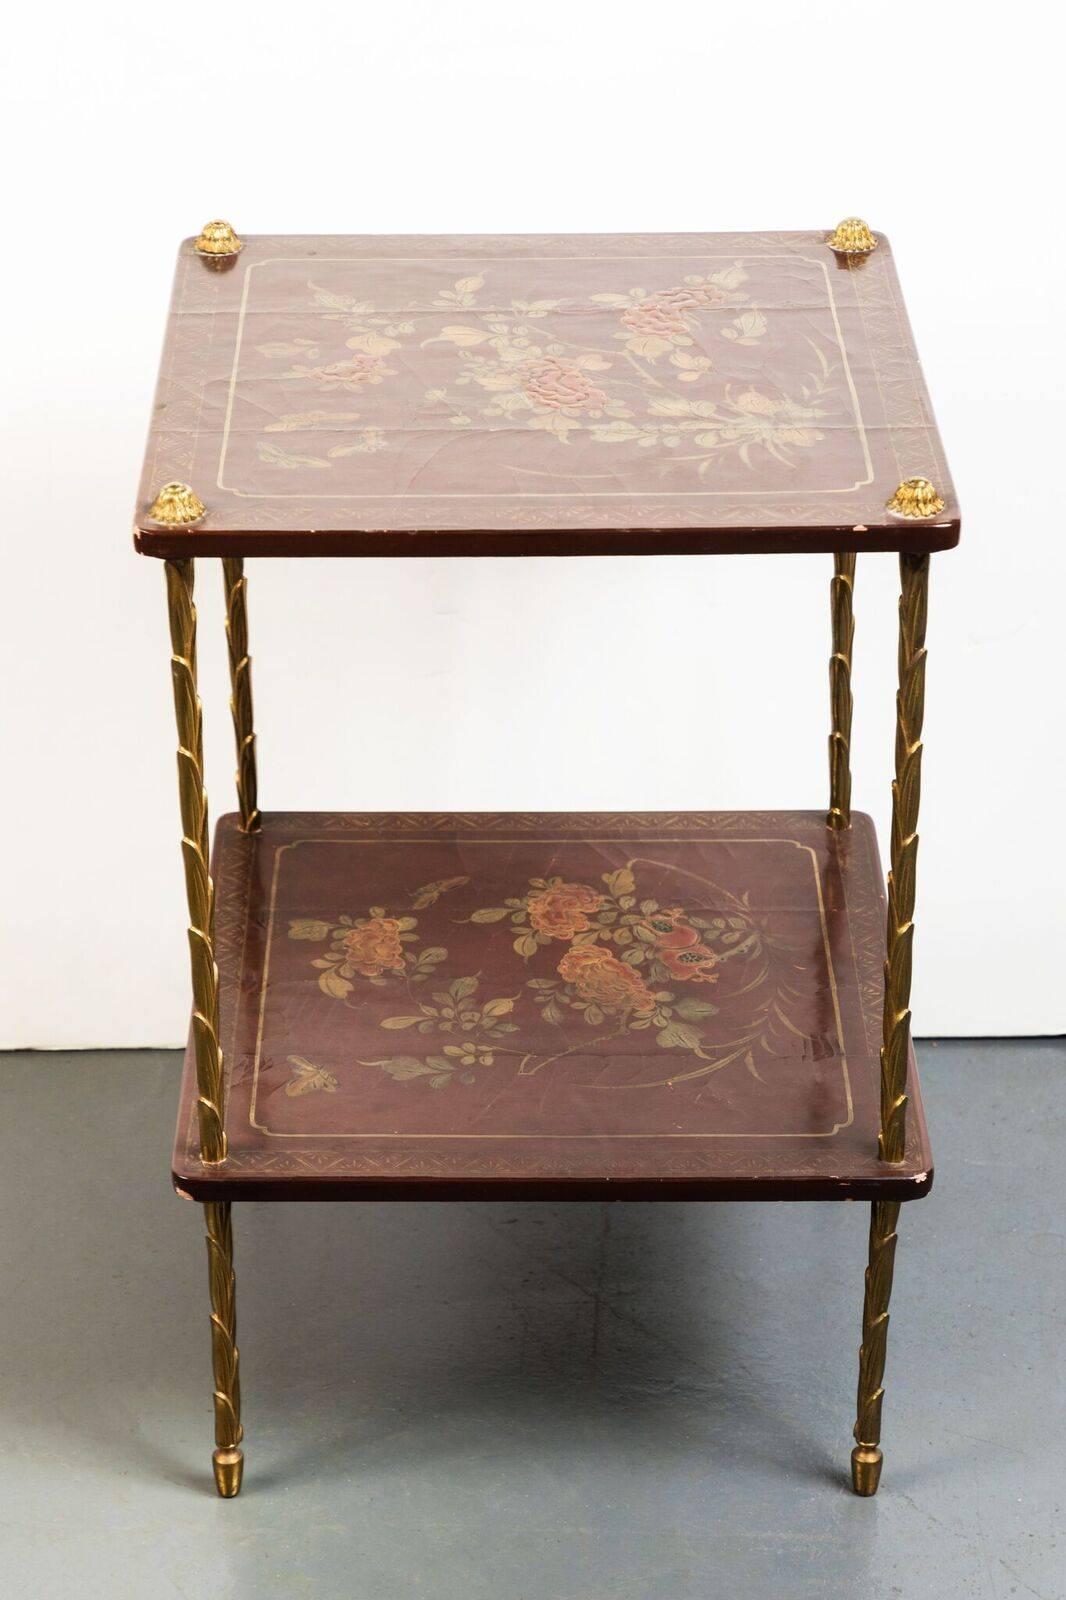 Pair of charming, hand-painted and lacquered, parcel-gilt, two tier, English, chinoiserie side tables in oxblood. Each standing on brass legs in a stylized, foliate design.